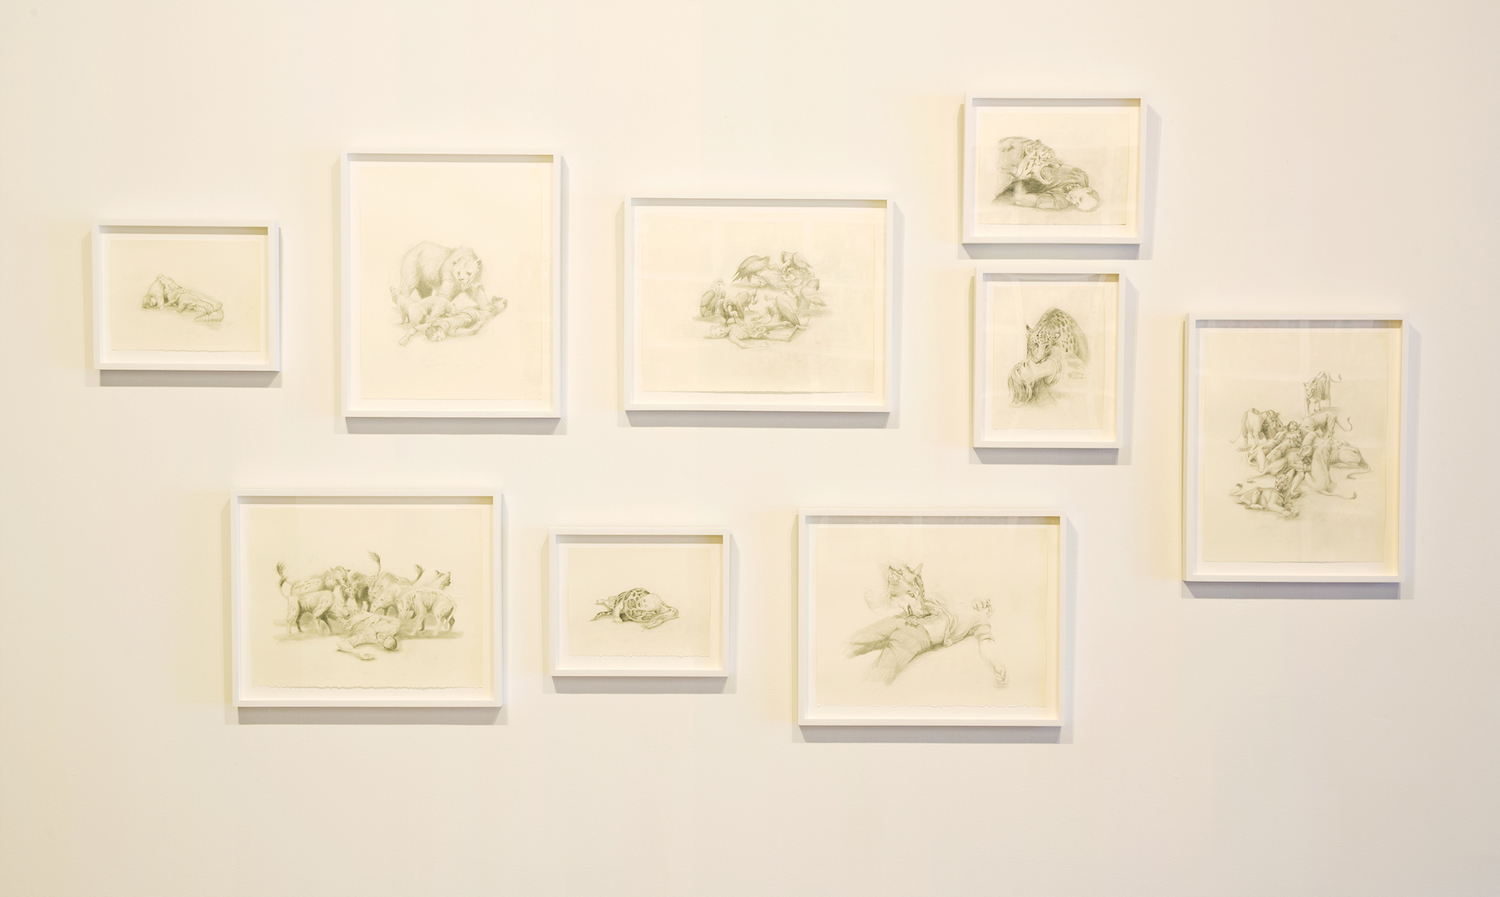 Neil Goldberg, *Wild Animals Eat My Family and Me: Lions and Sandy; Wolf and me; Python and John; Hyenas and Jeff; Alligator and Parker; Bears and Brian; Vultures and Mom & Dad; Tiger and Howard; Leopard and Finn*, 2015. Graphite on paper